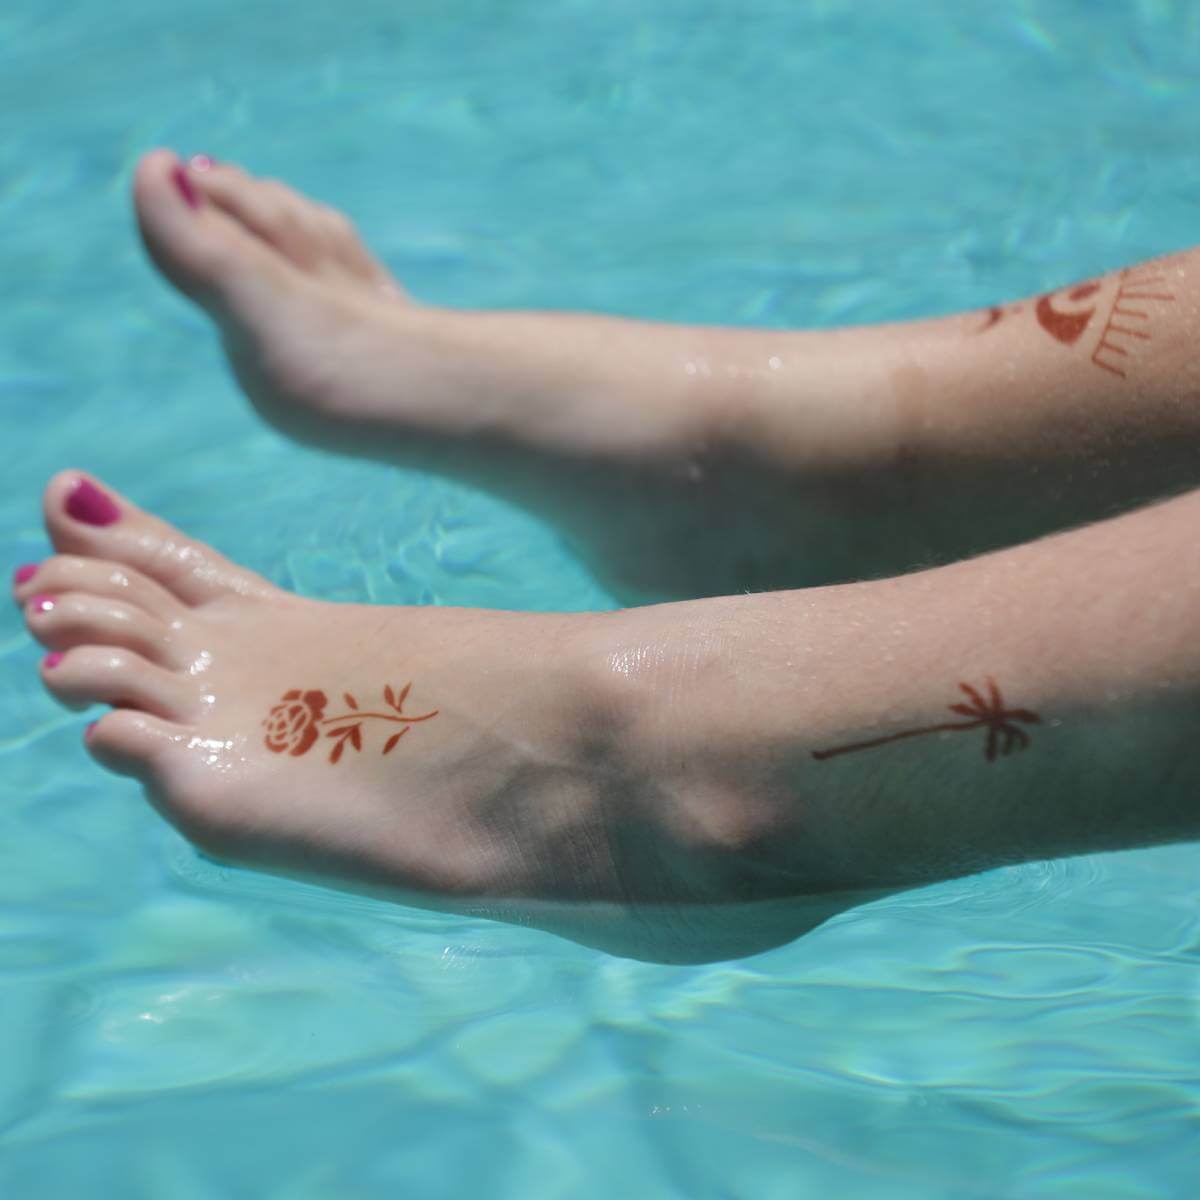 Sun - small rose and palm tree temporary tattoos on foot